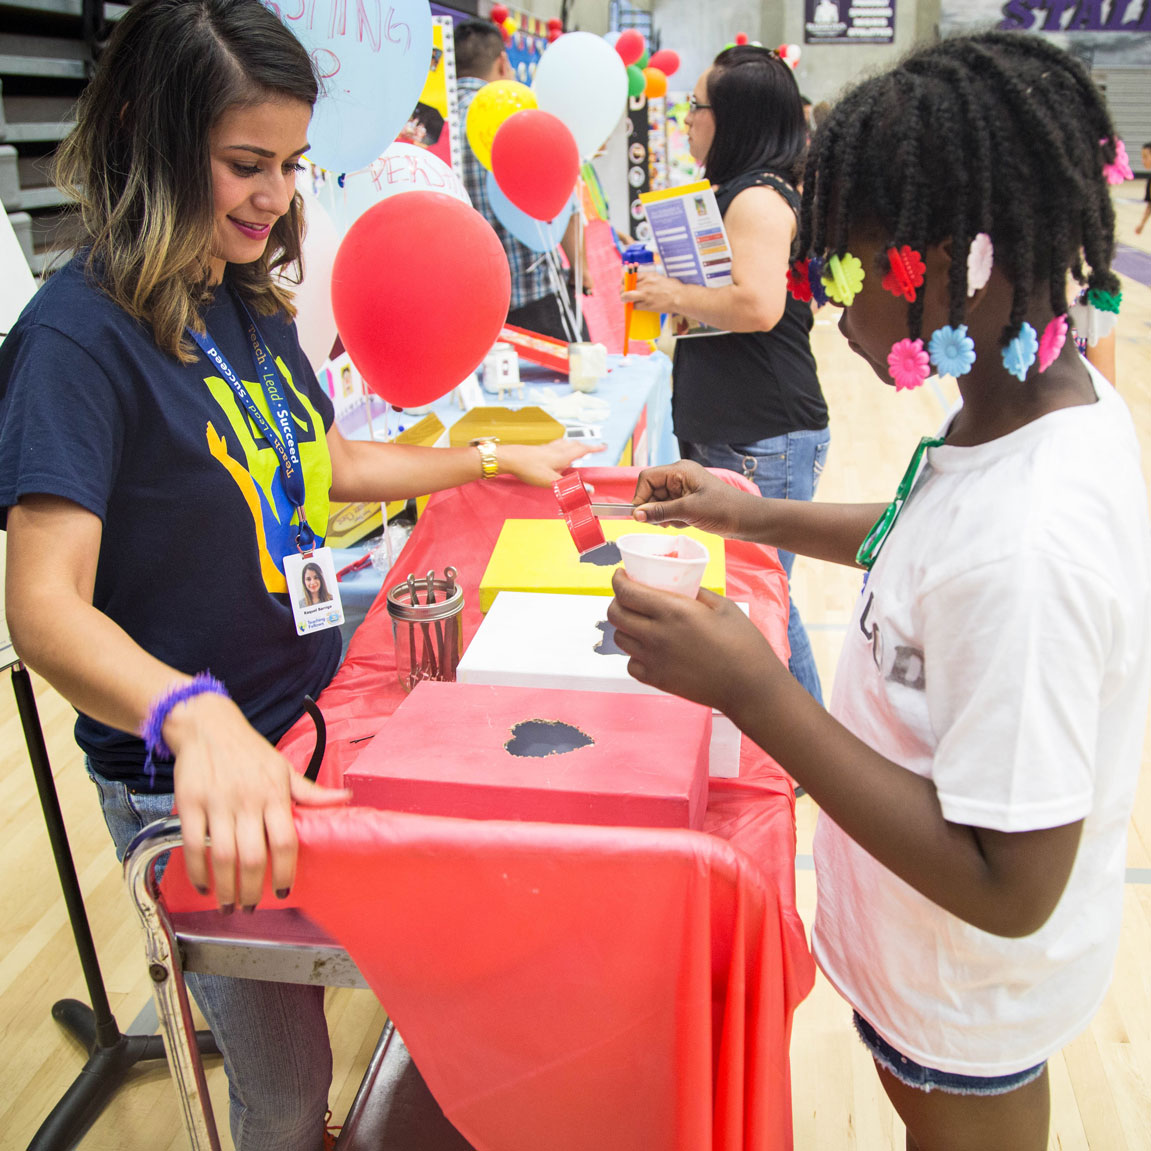 Closeup of a Teaching Fellow standing at an activity booth with a red tablecloth and a student with black hair and multiple colorful hair clips participating in the activity.